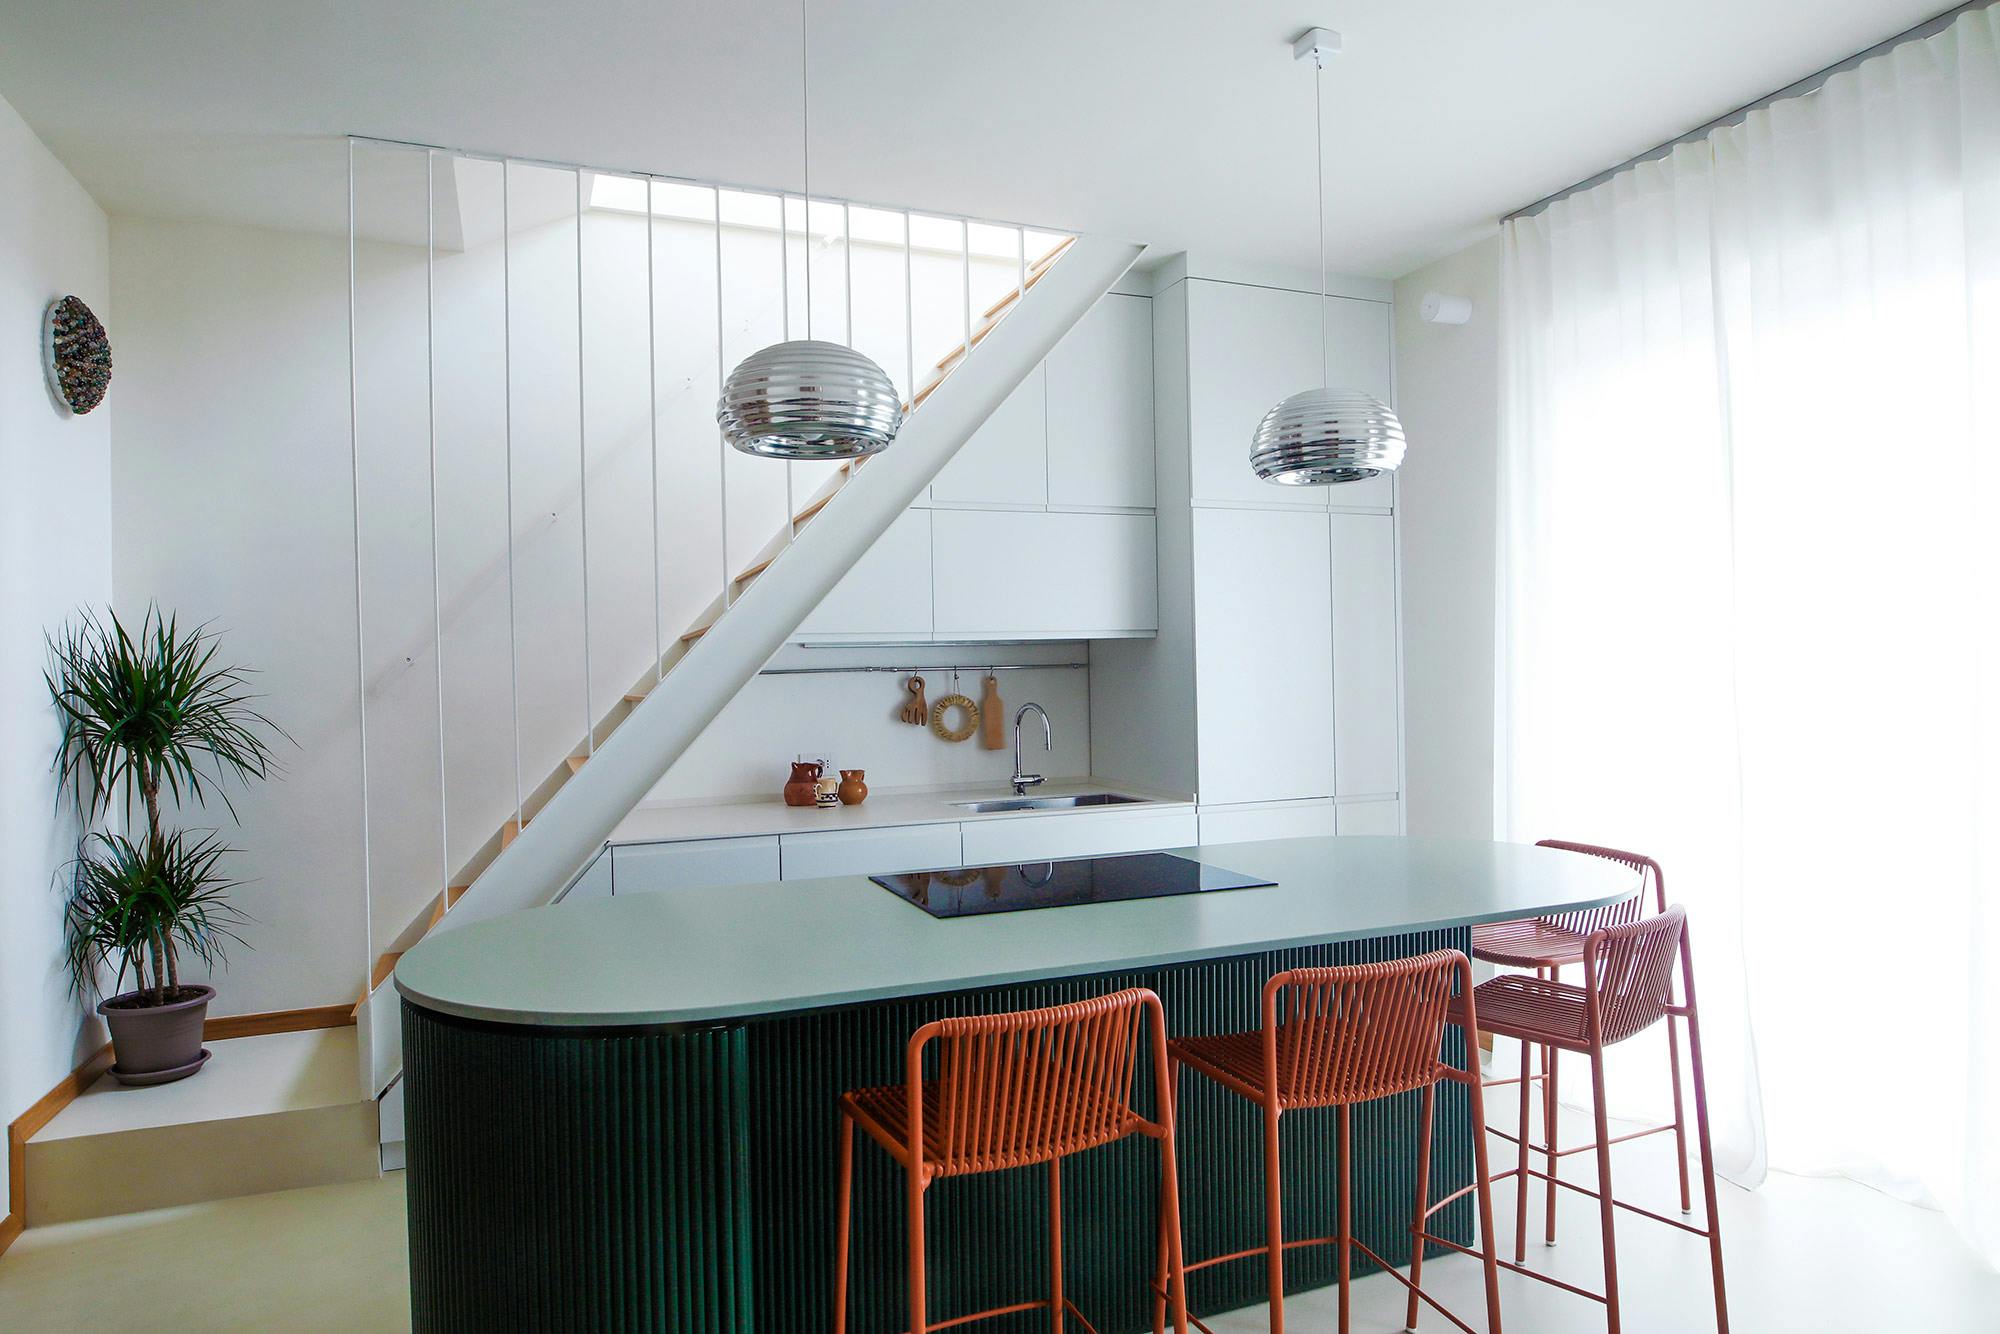 Imagem número 34 da actual secção de A functional kitchen under the stairs to make the most of space without compromising on design da Cosentino Portugal